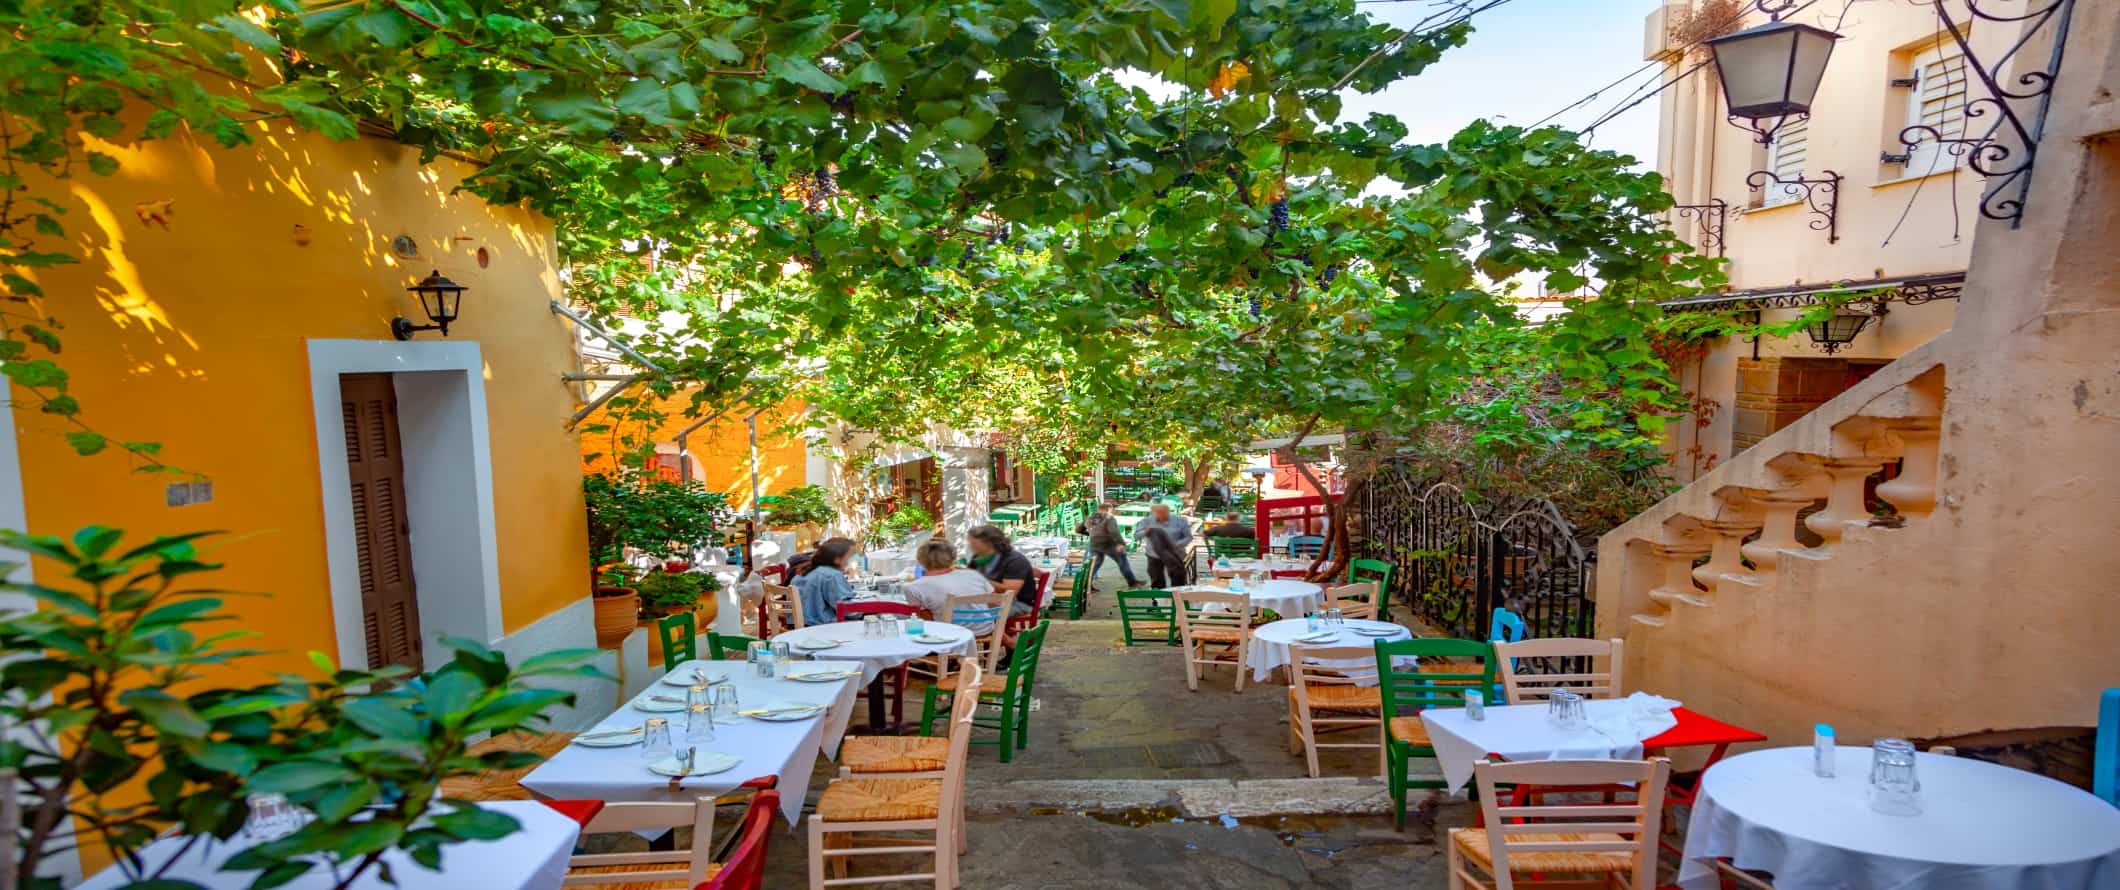 Cafe tables lining an alleyway covered with a lush tree branches, surrounded by bright yellow buildings, in Athens, Greece.